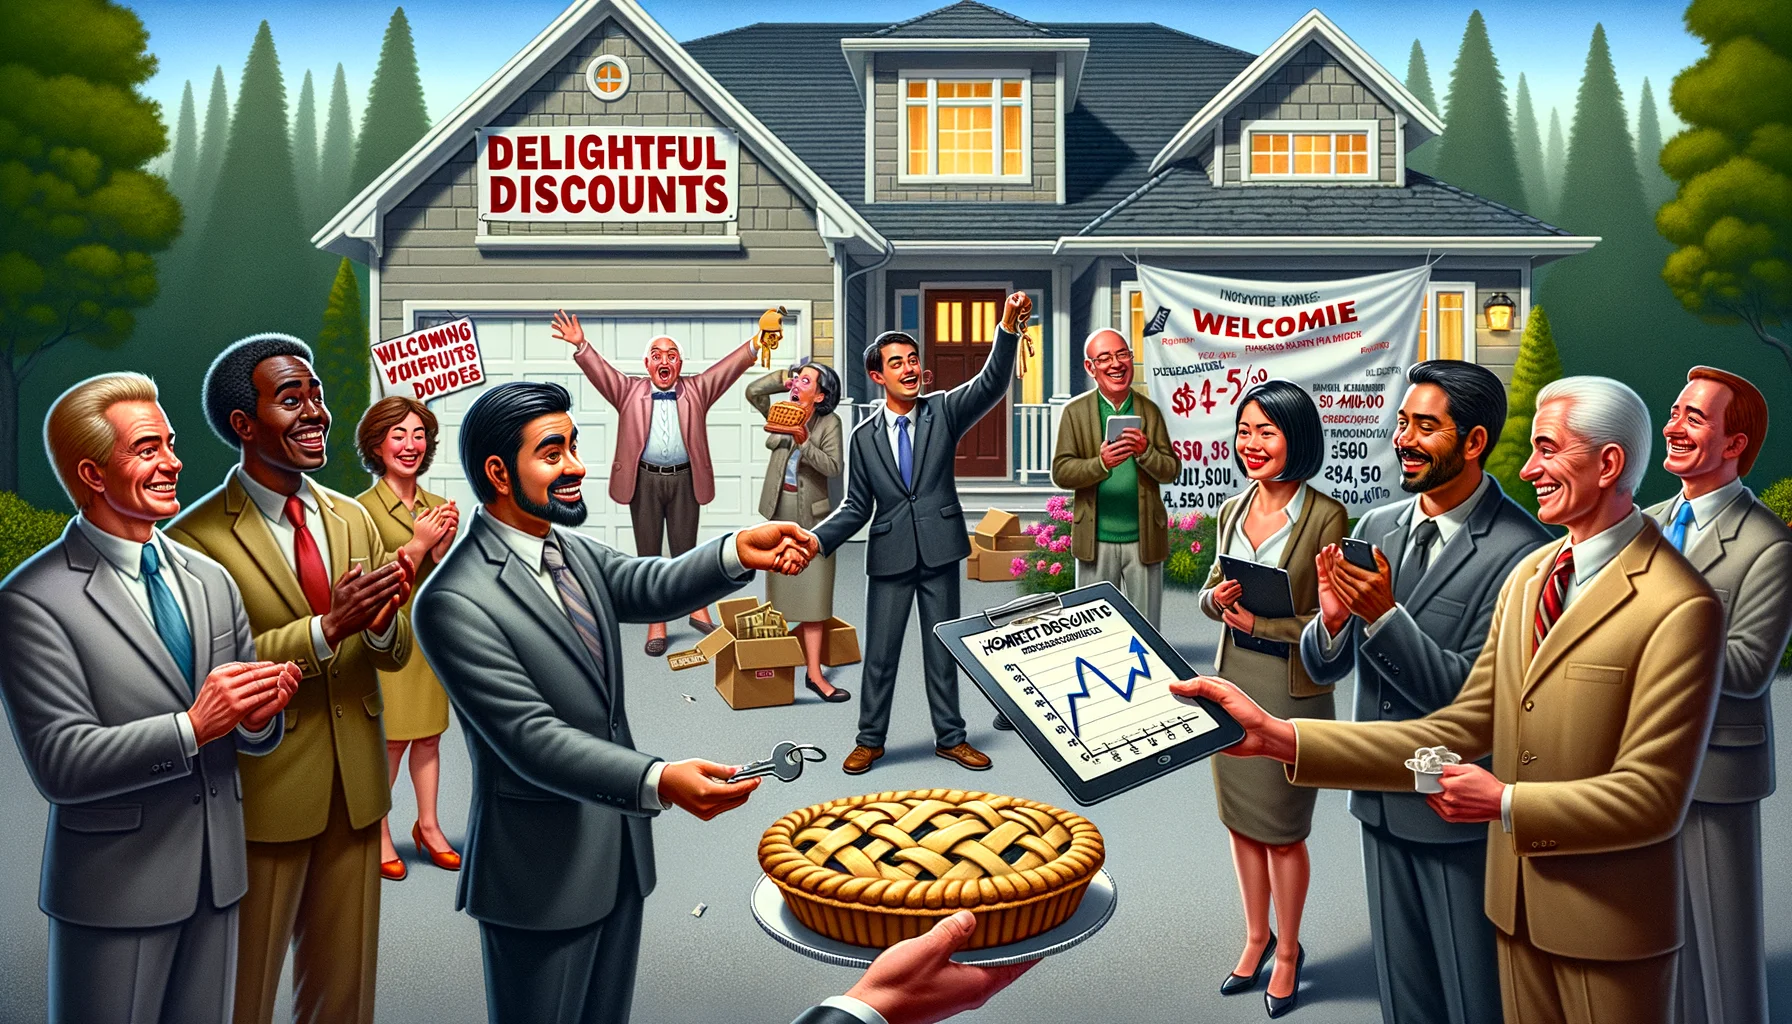 Imagine a humorous, realistic snapshot of the perfect circumstances for purchasing a house during an economic downturn. The scene should feature a group of people celebrating in front of a sold house with a 'Delightful Discounts' banner draped across the front. A Caucasian male real estate agent is handing a set of keys to a Hispanic female, signifying ownership change. Next to him, a Middle-Eastern man, a financial advisor, is showing a graph on a tablet displaying a drastic price drop. Nearby, a White female neighbor looks on, hopeful, holding a welcome pie, while a South Asian male, another neighbor, cheerfully waves a homebuyer's guidebook.